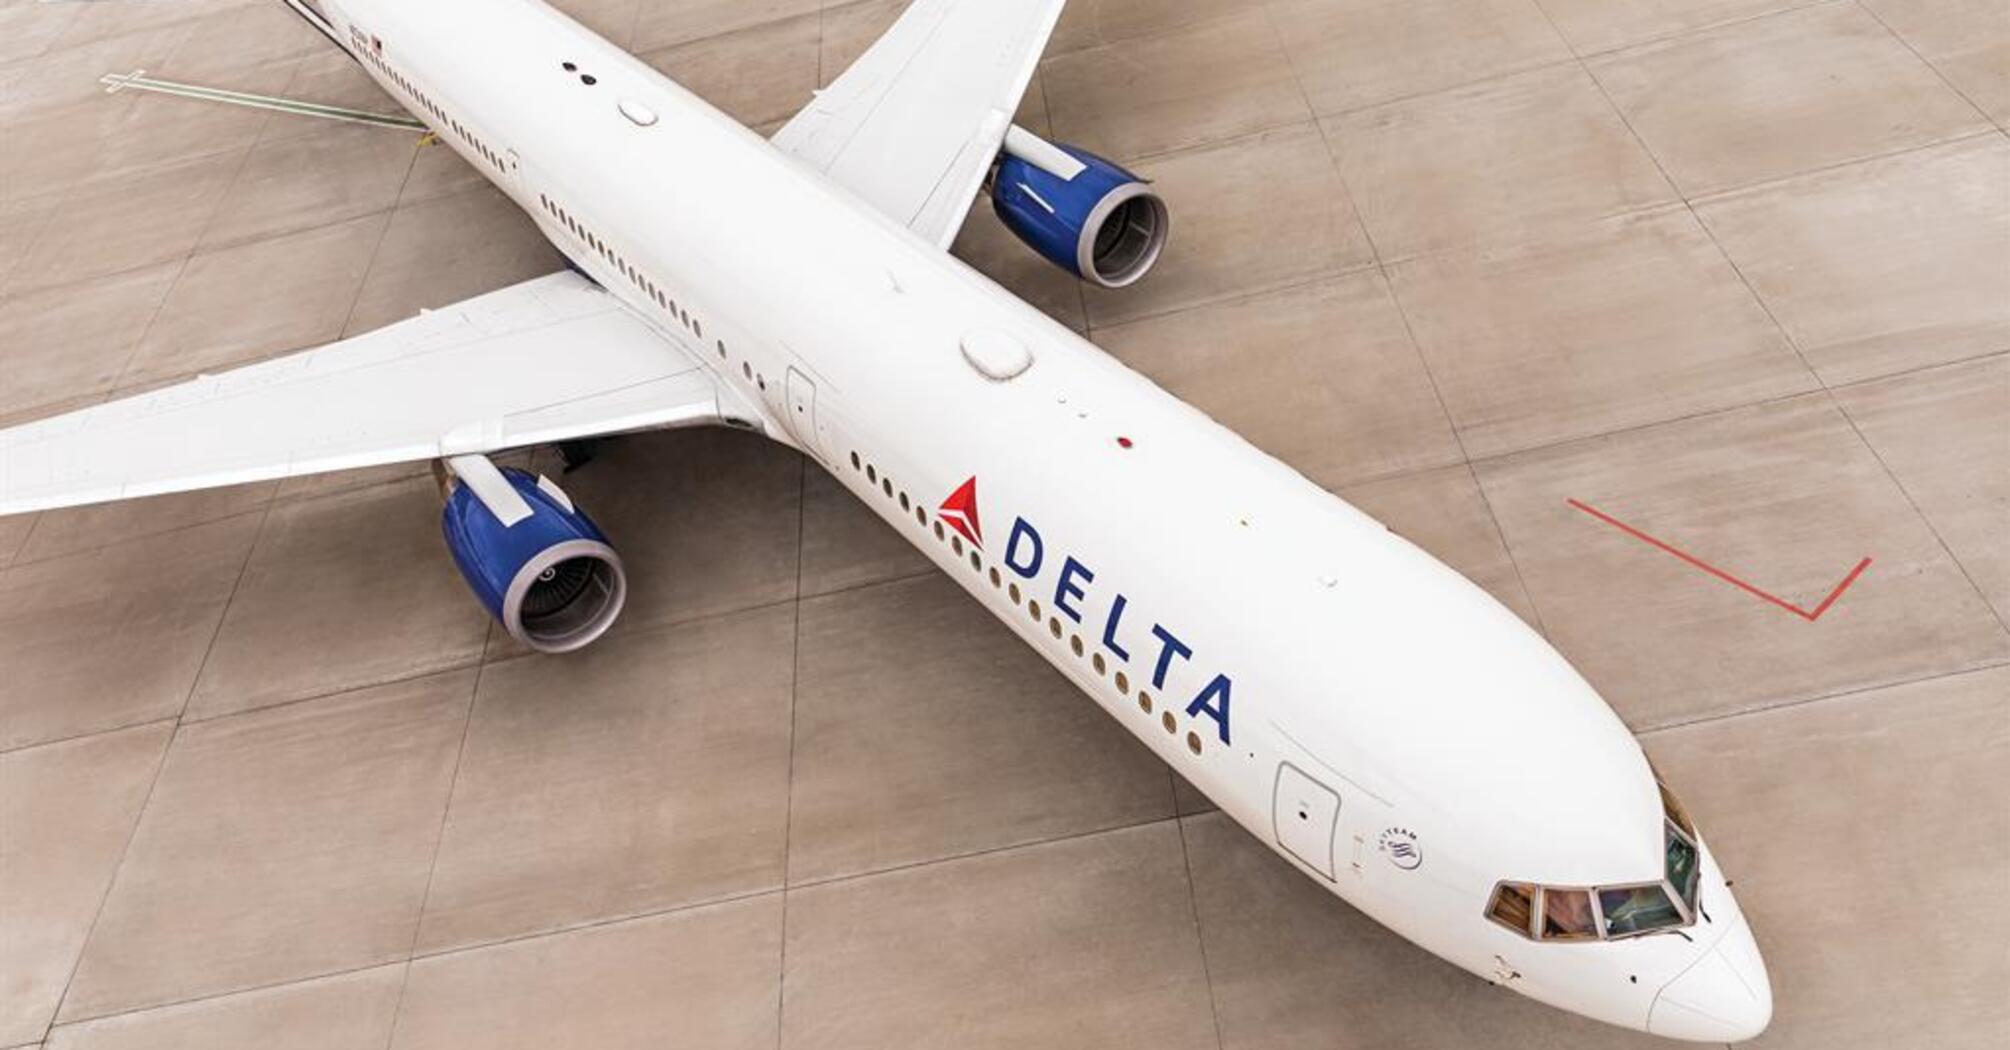 "Worm Rain": Delta Air Lines flight was disrupted due to a disgusting situation on board